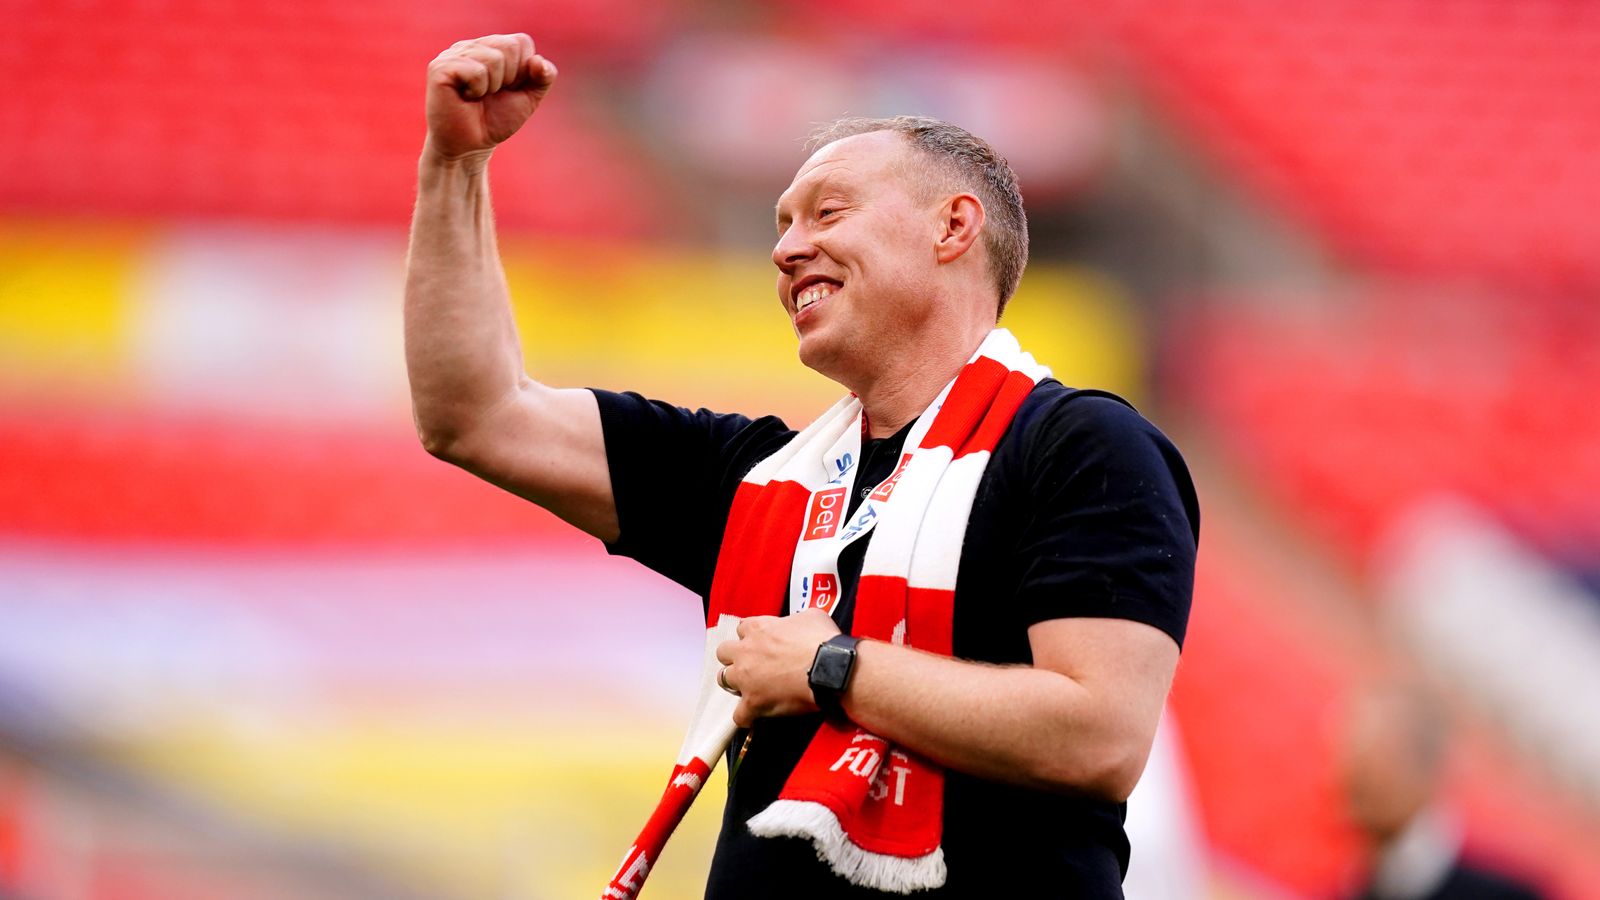 Steve Cooper ‘proud’ after leading Nottingham Forest to Premier League | Huddersfield were robbed on VAR calls, says Michael Hefele